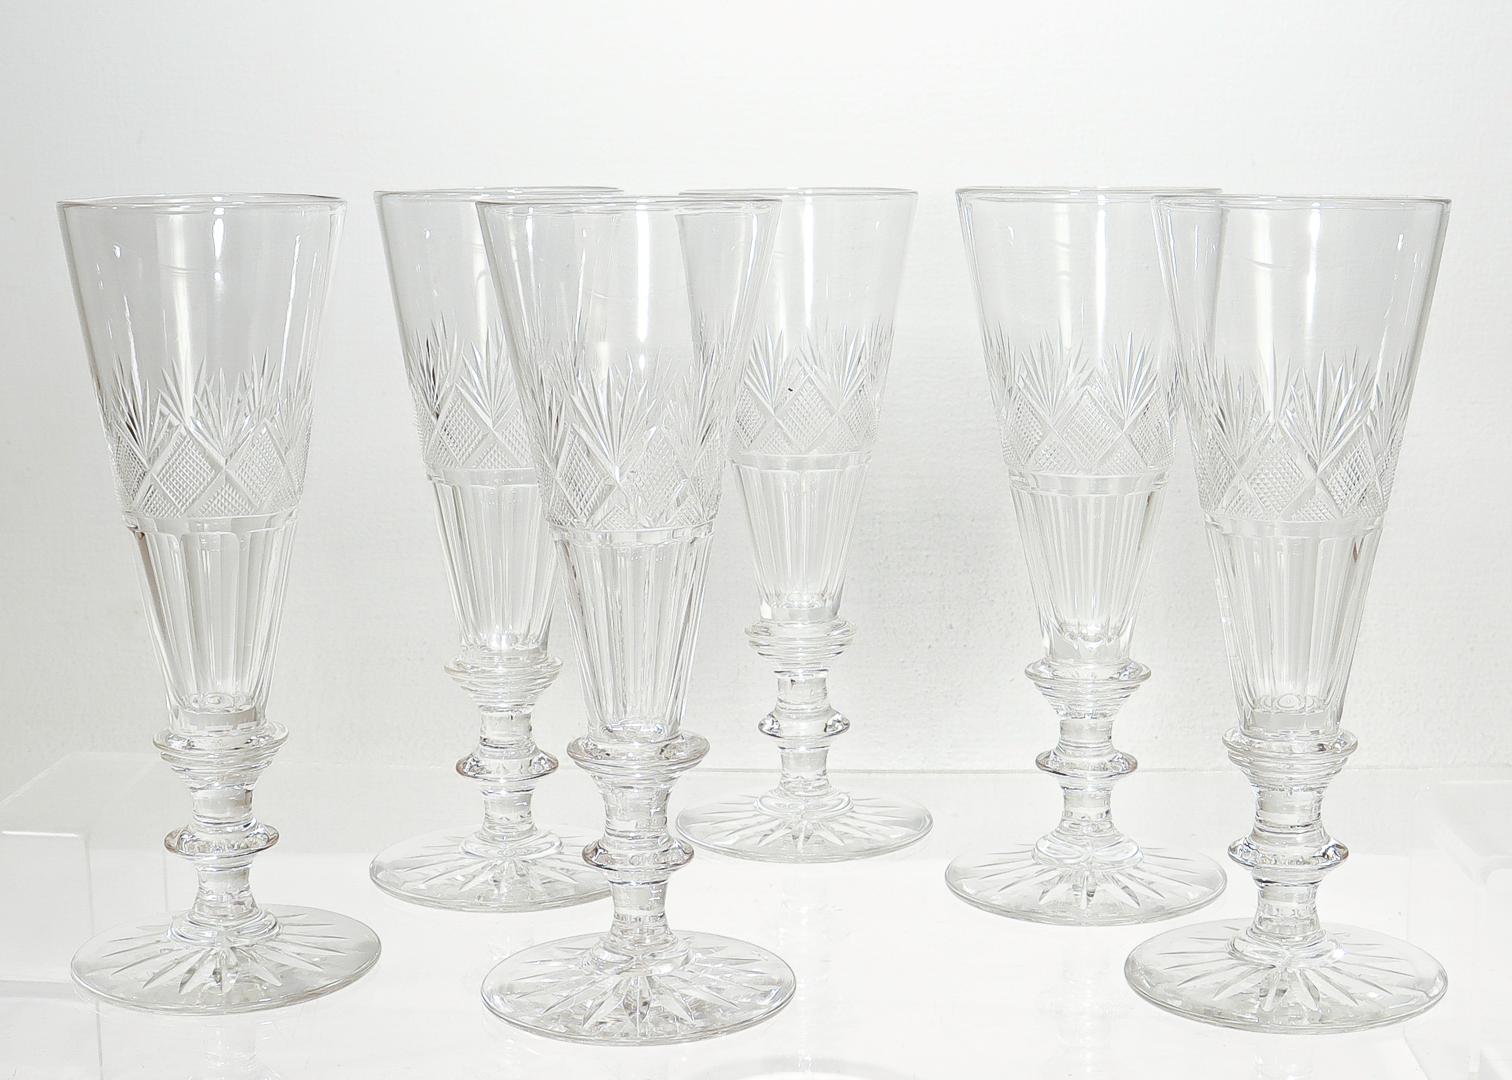 Set of 6 Antique 19th Century Cut Glass Champagne Flutes Attributed to Bakewell For Sale 1